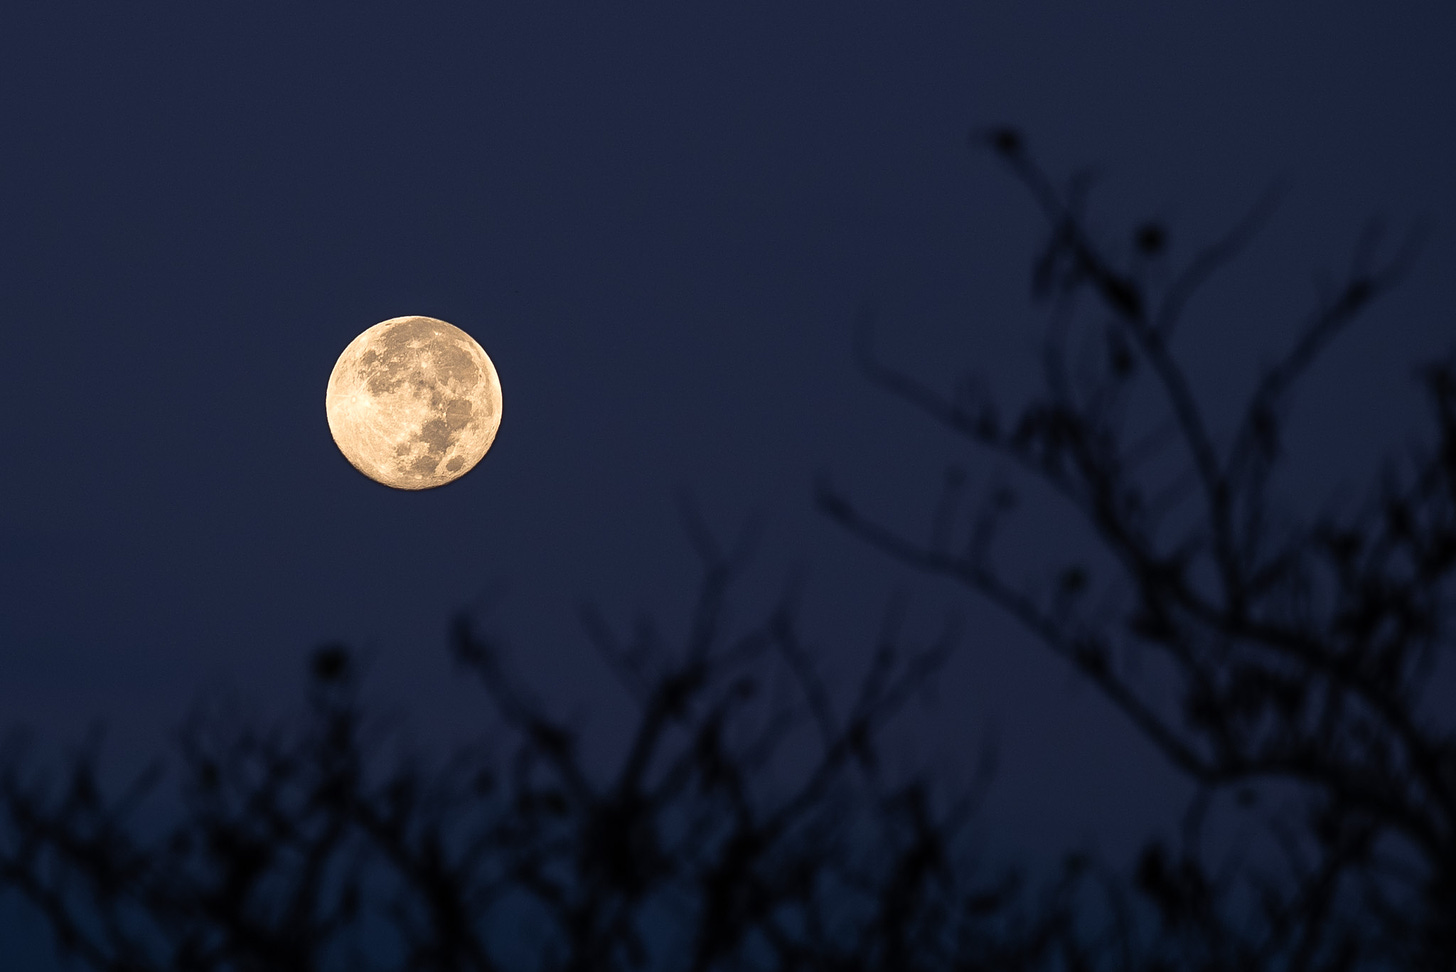 The full moon showing the shadows of craters against a dark blue night sky with the shadows of bare tree limbs in the foreground